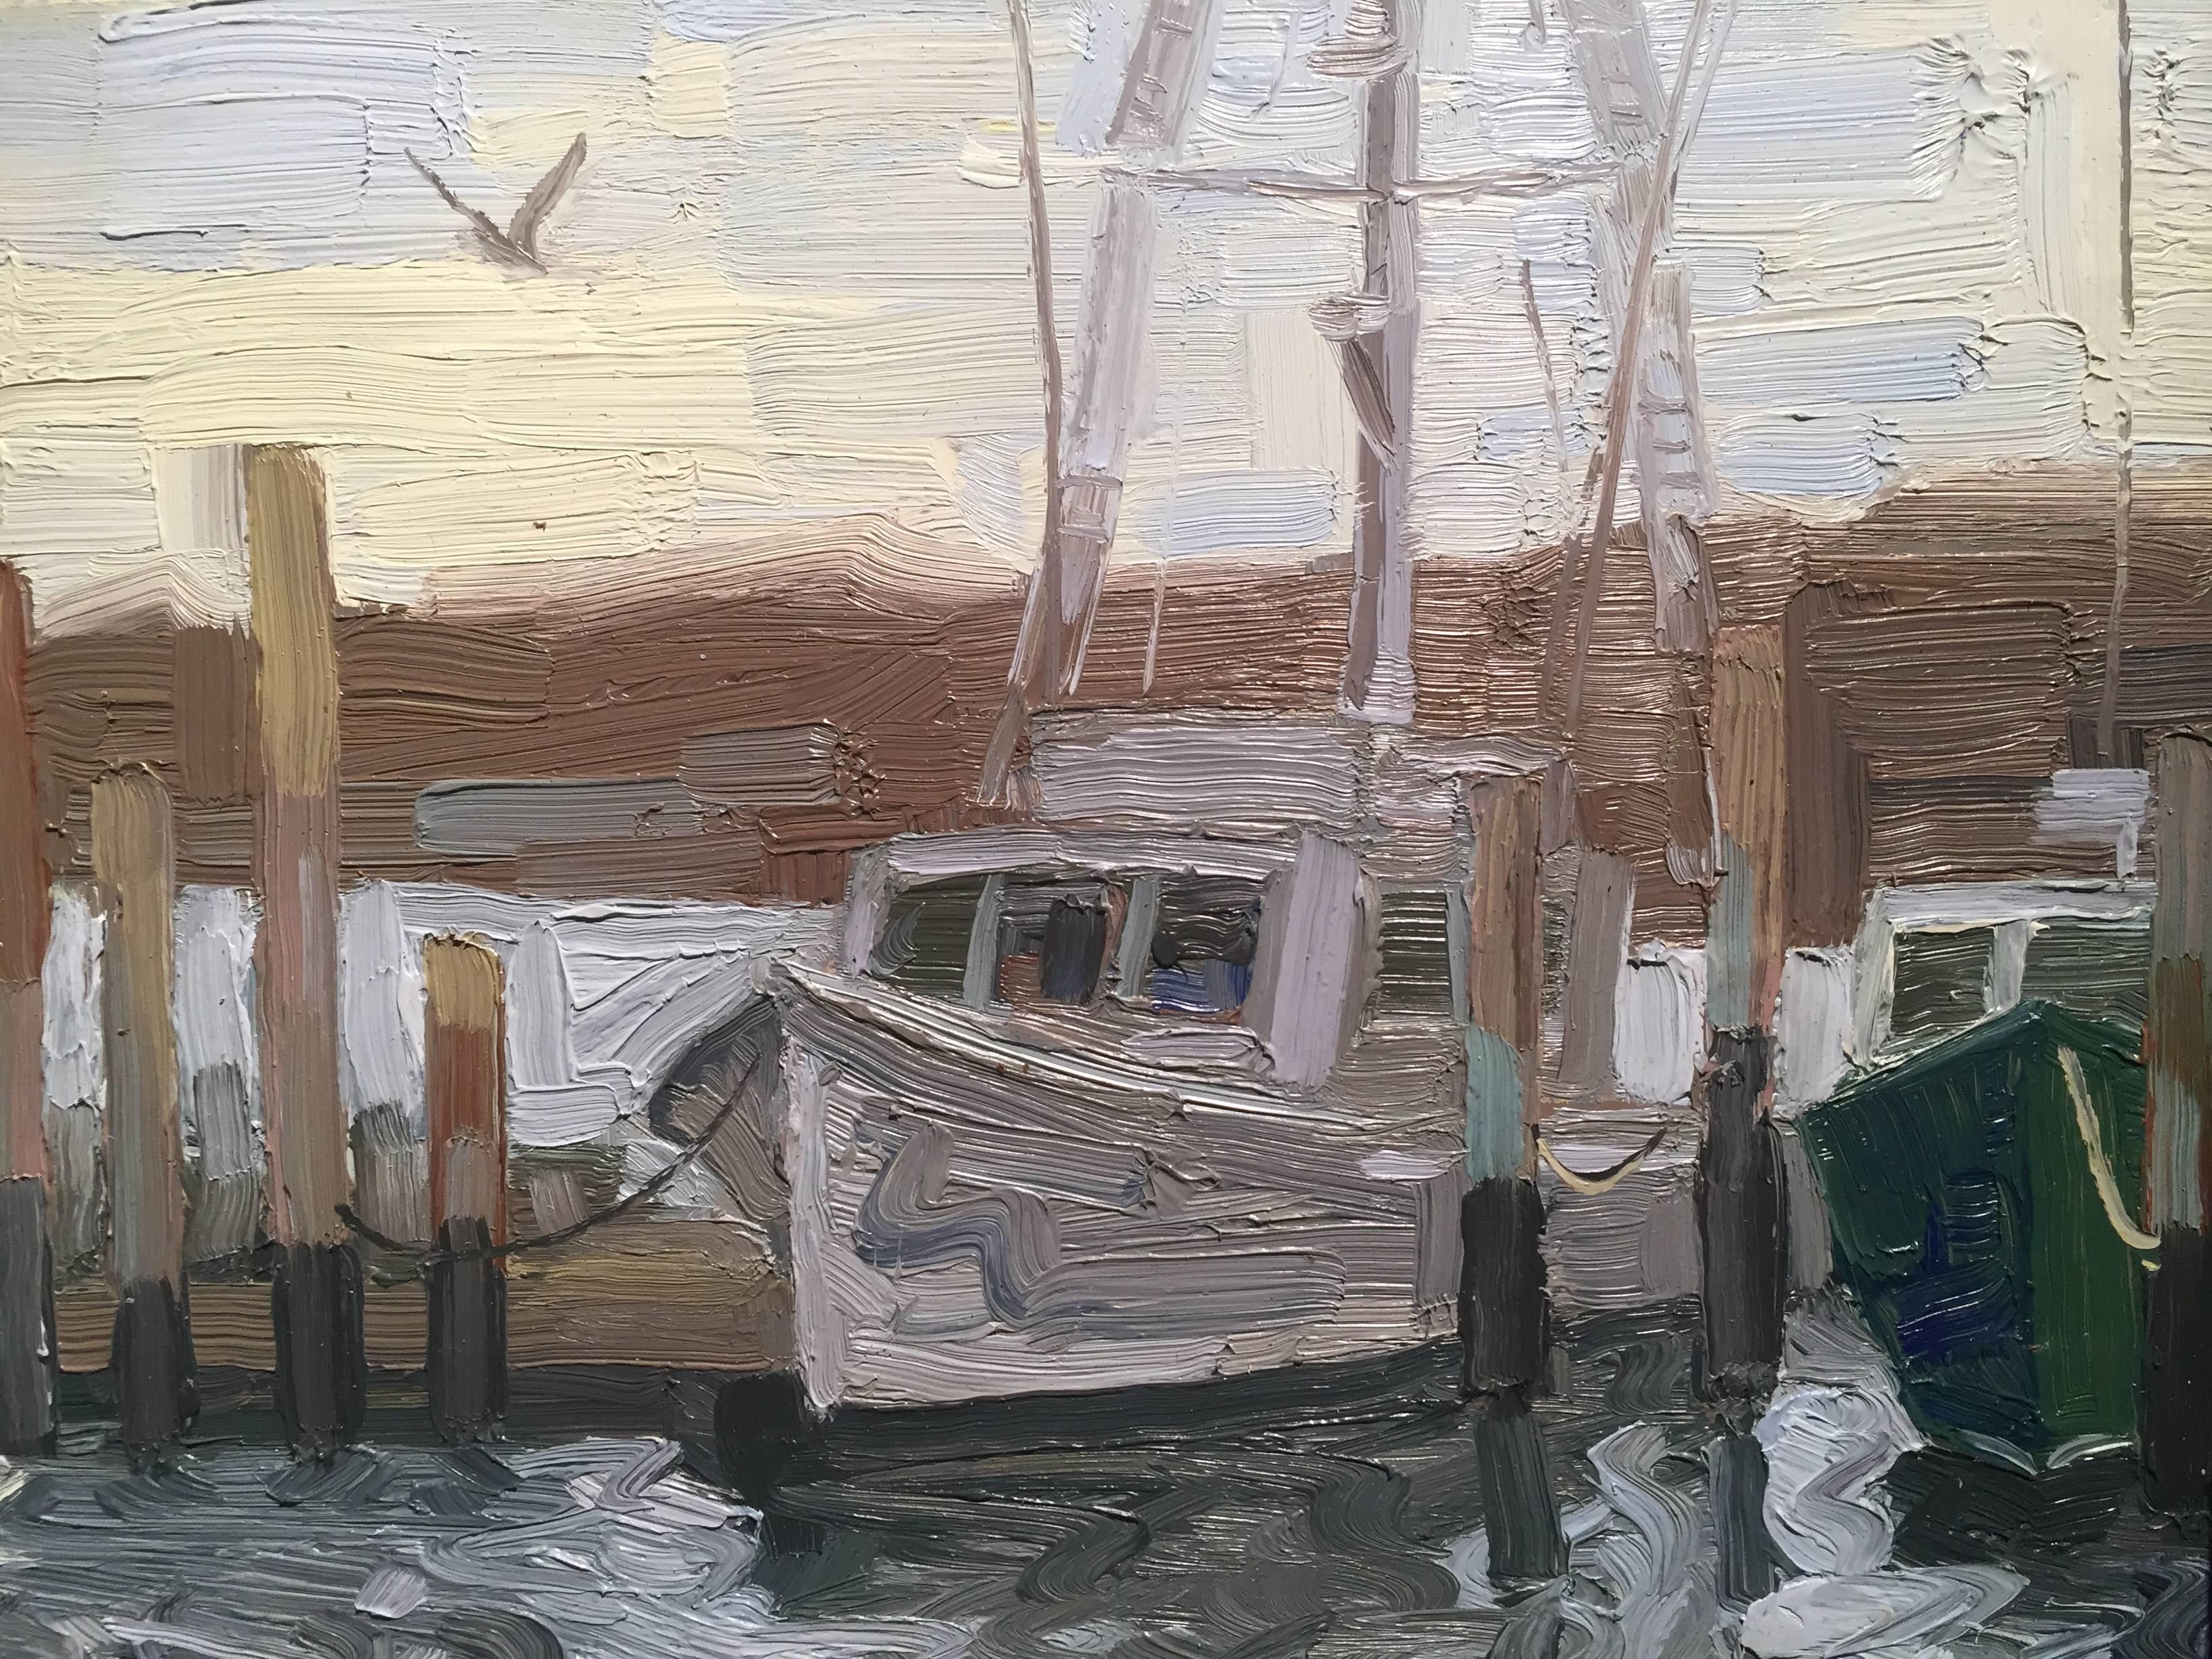 Painted en plein air in Montauk, New York. A fishing boat leaves the marina and heads out to sea to find todays catch. The water is a silvery blue, with hints of white, reflecting the overcast sky above. Lussier exaggerates the motion of the water